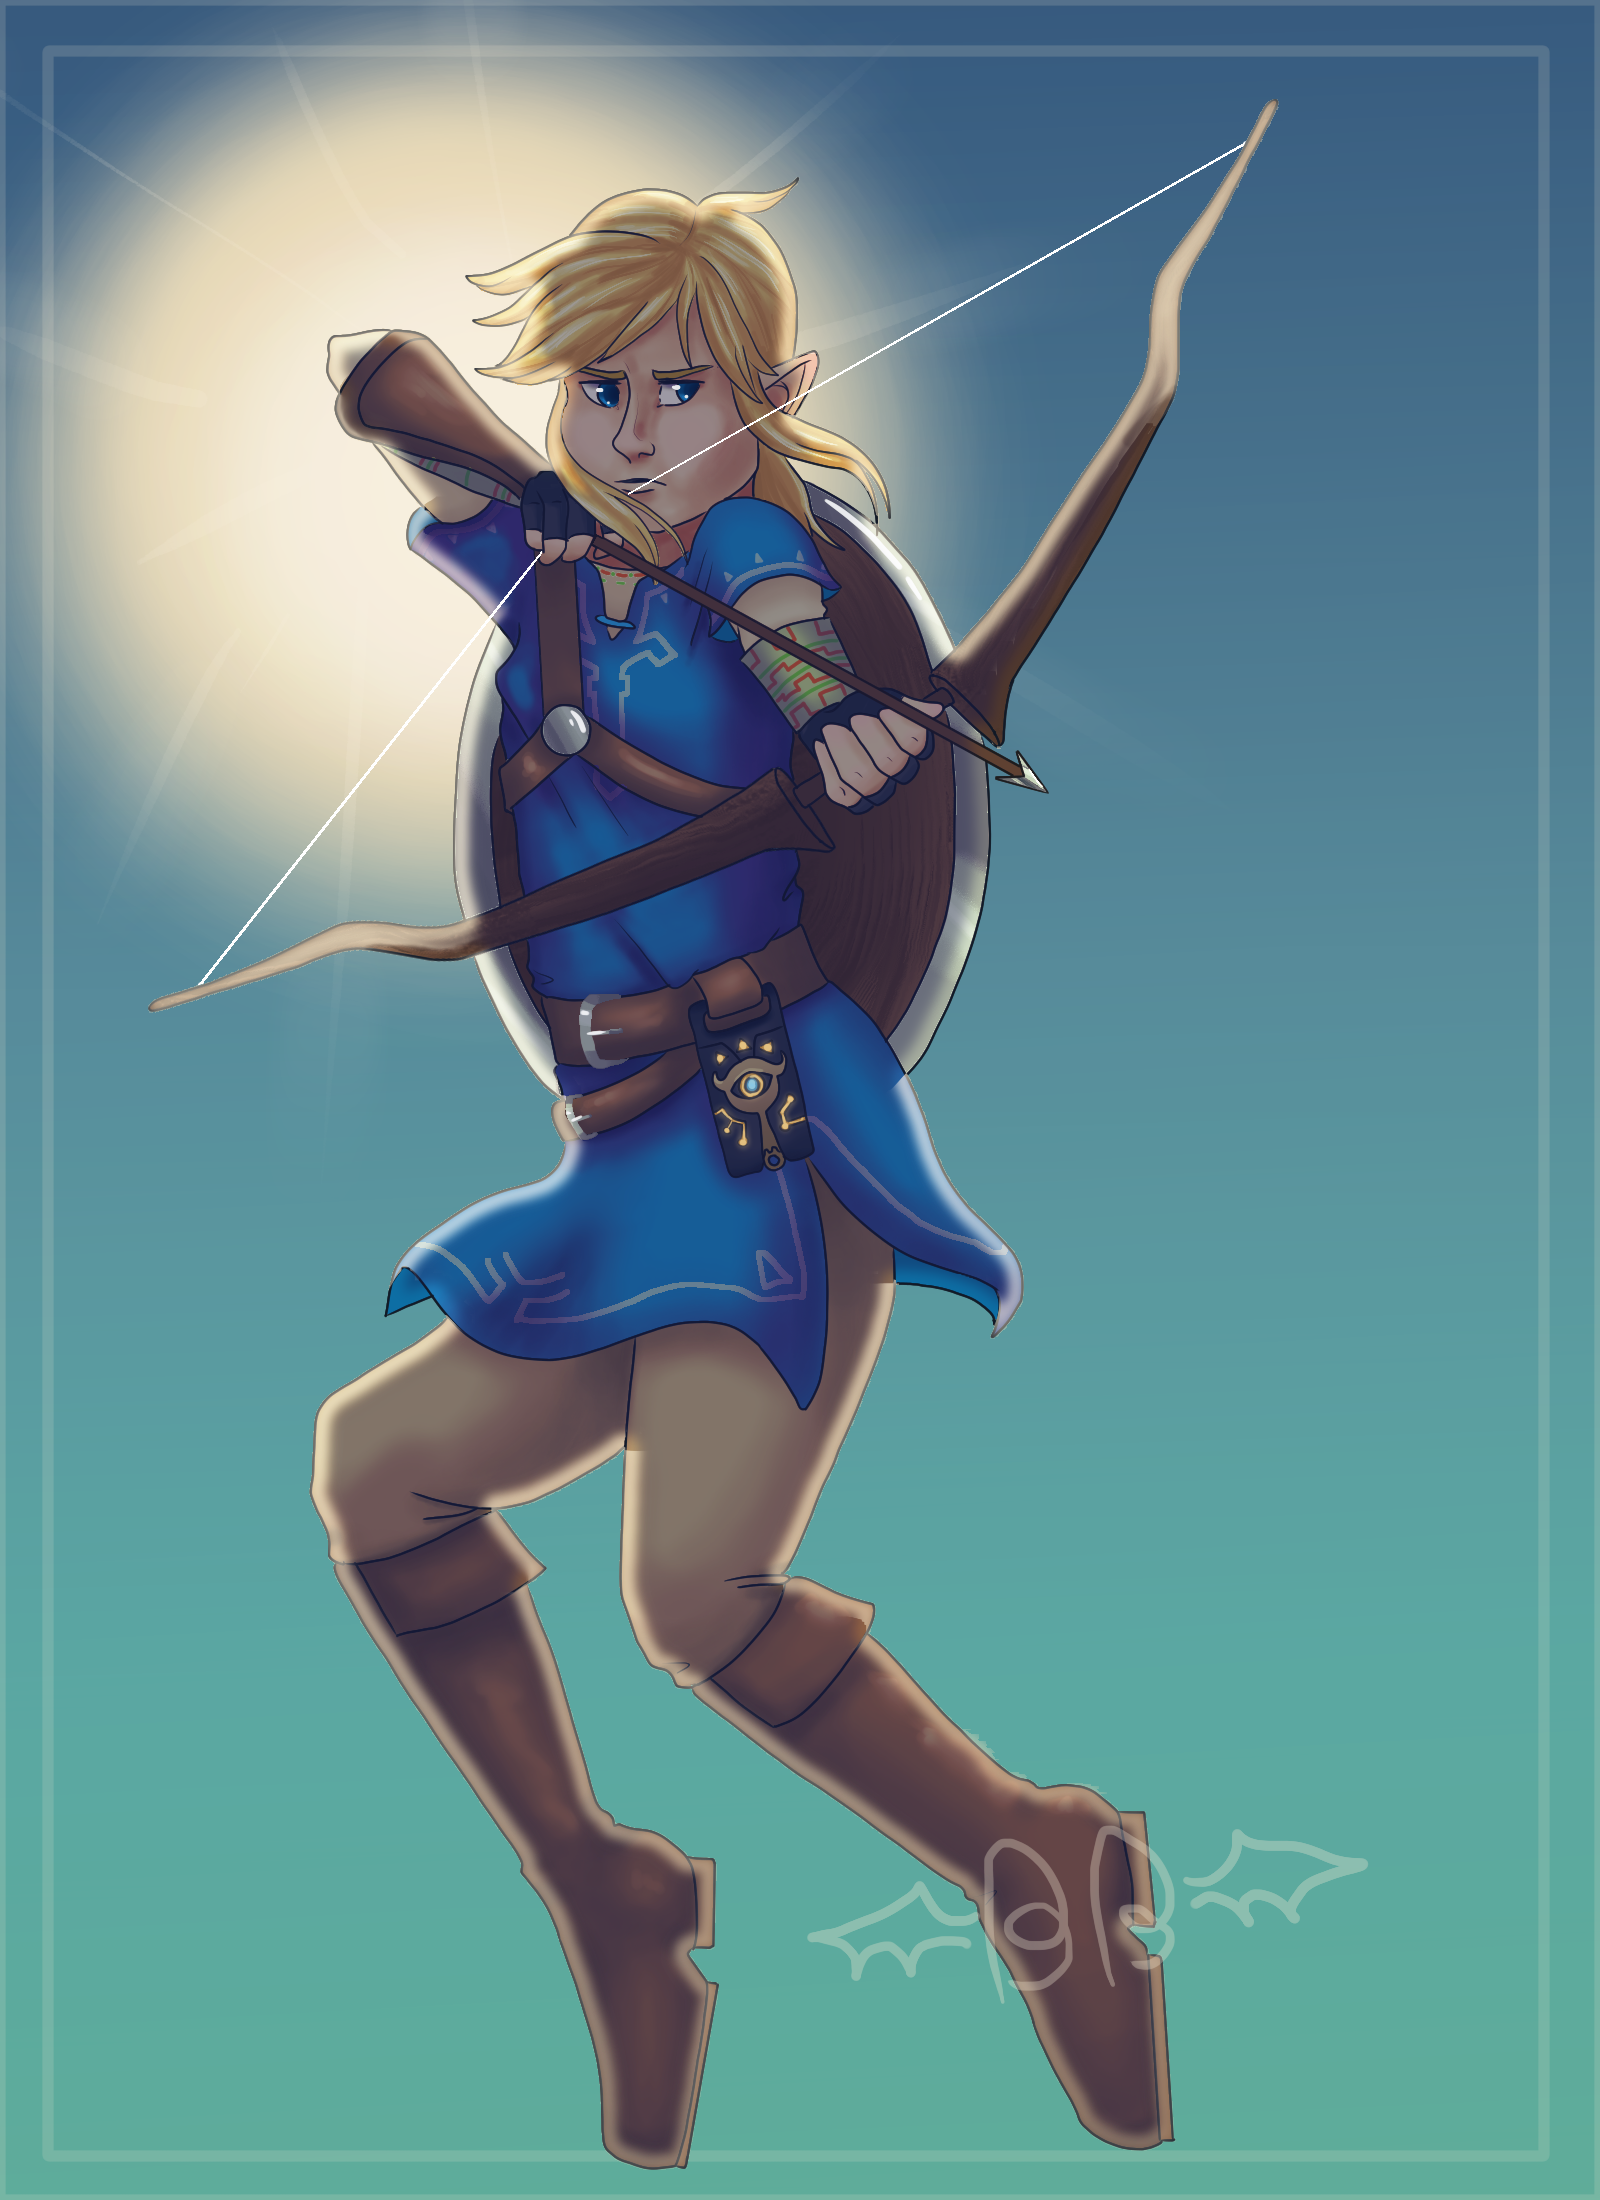 A piece of Link from Legend of Zelda leaping with bow and arrow drawn